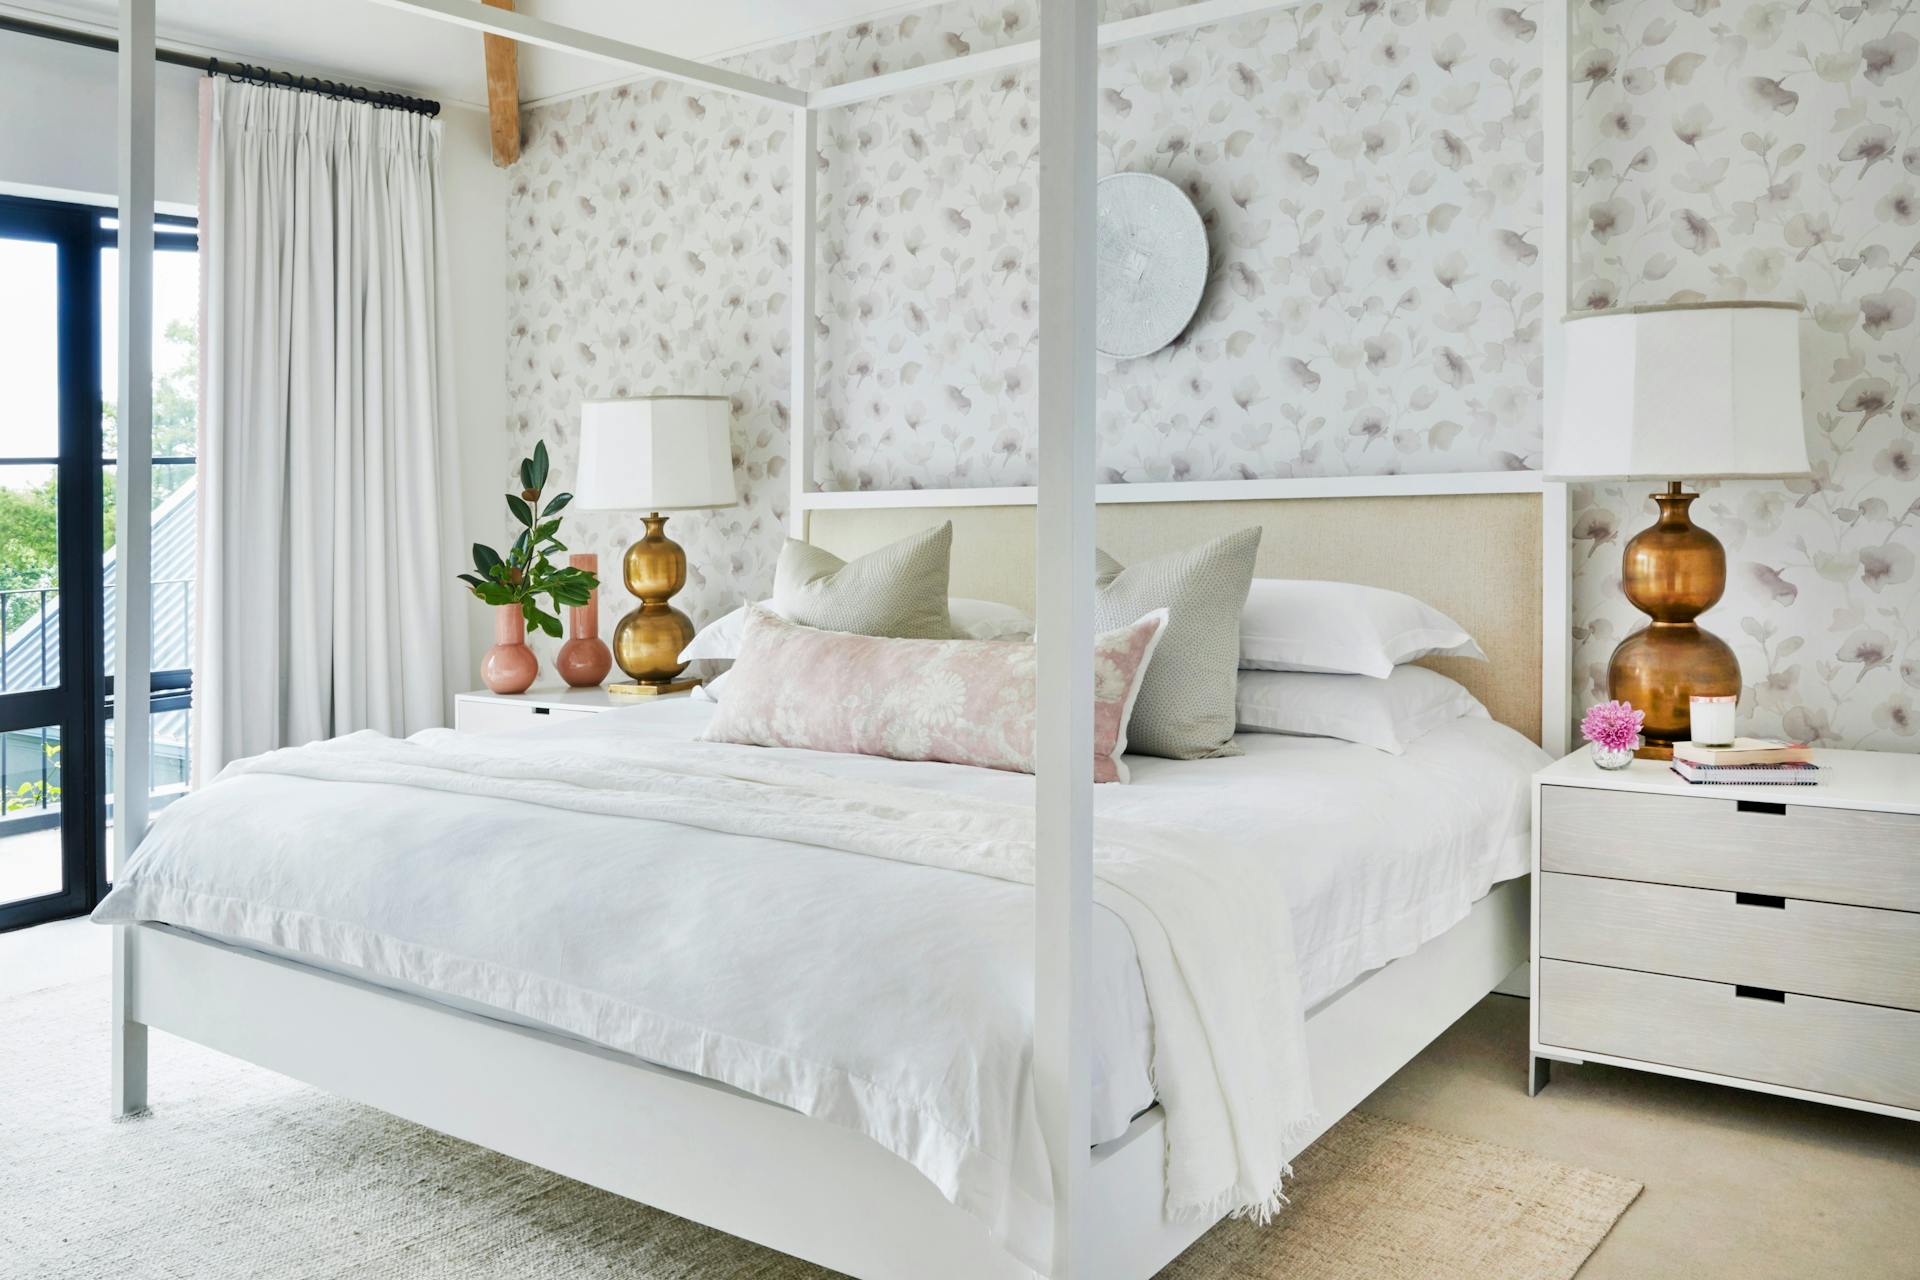 A wide four-poster bed with a white frame, white linen and pale-coloured pillows sits in front of a wall papered in a pale, sepia botanical print. White side tables to the left and right of the bed hold metallic lamps and vases.